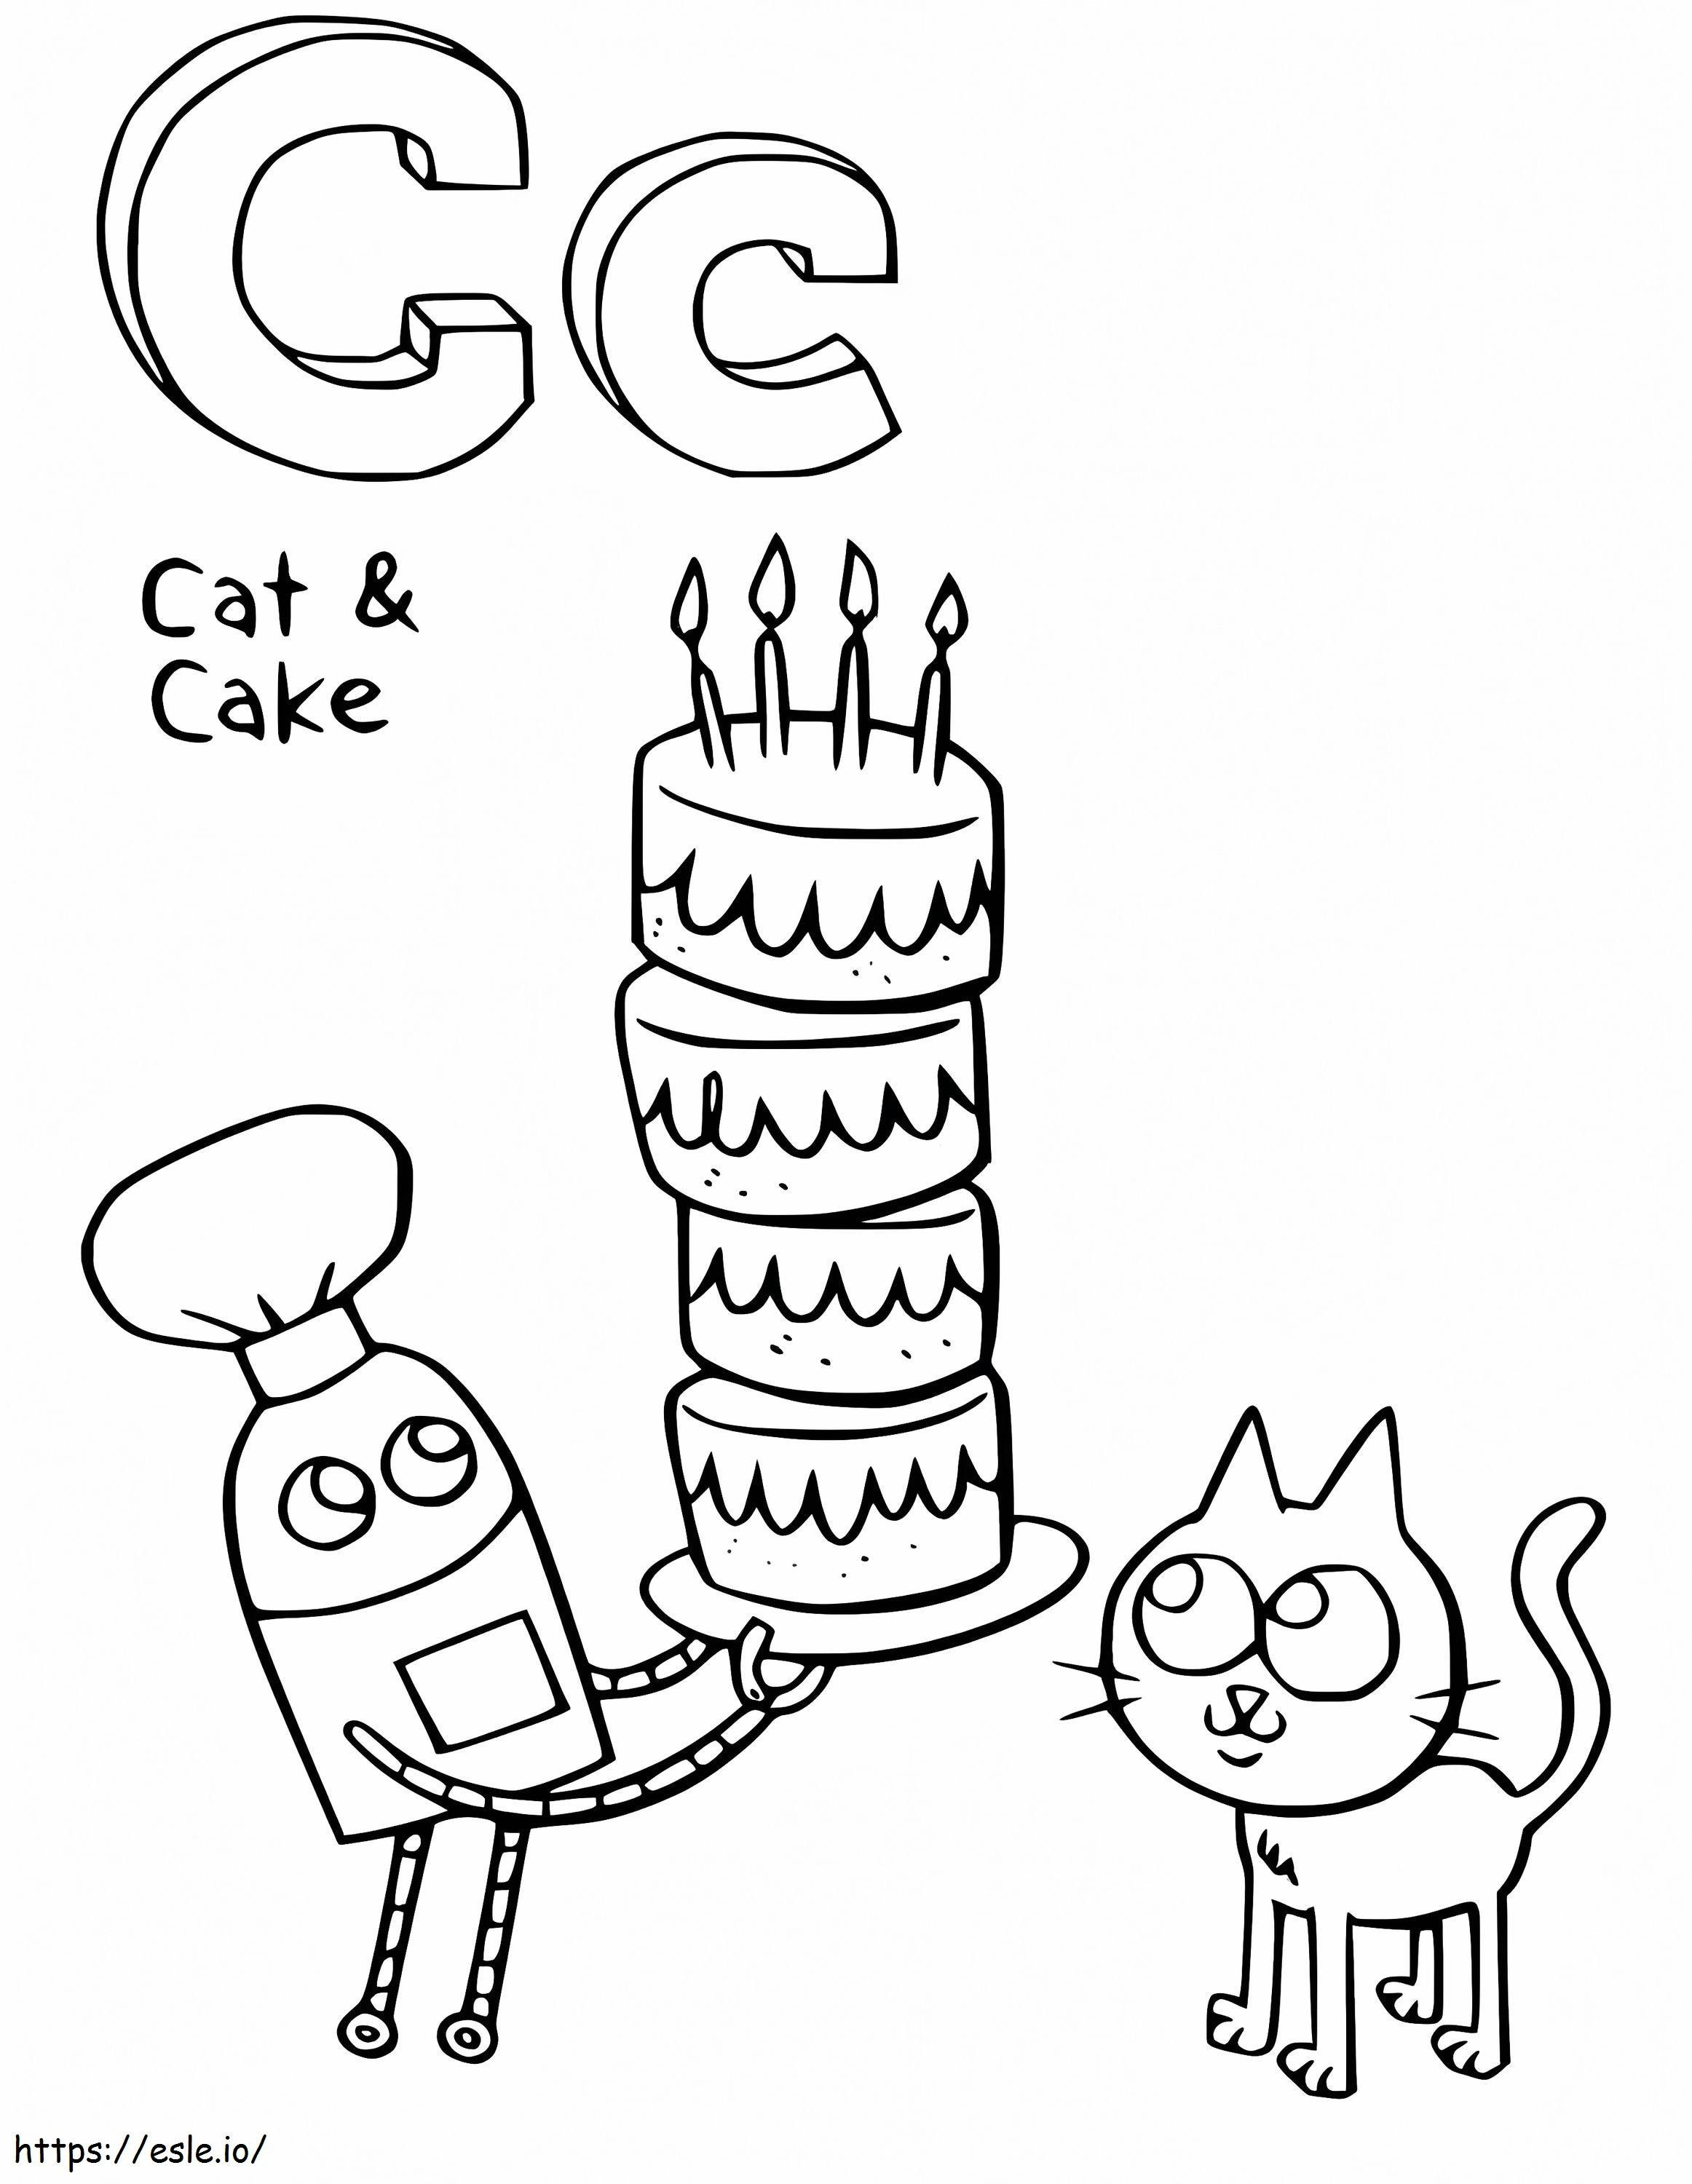 StoryBots Letter C coloring page